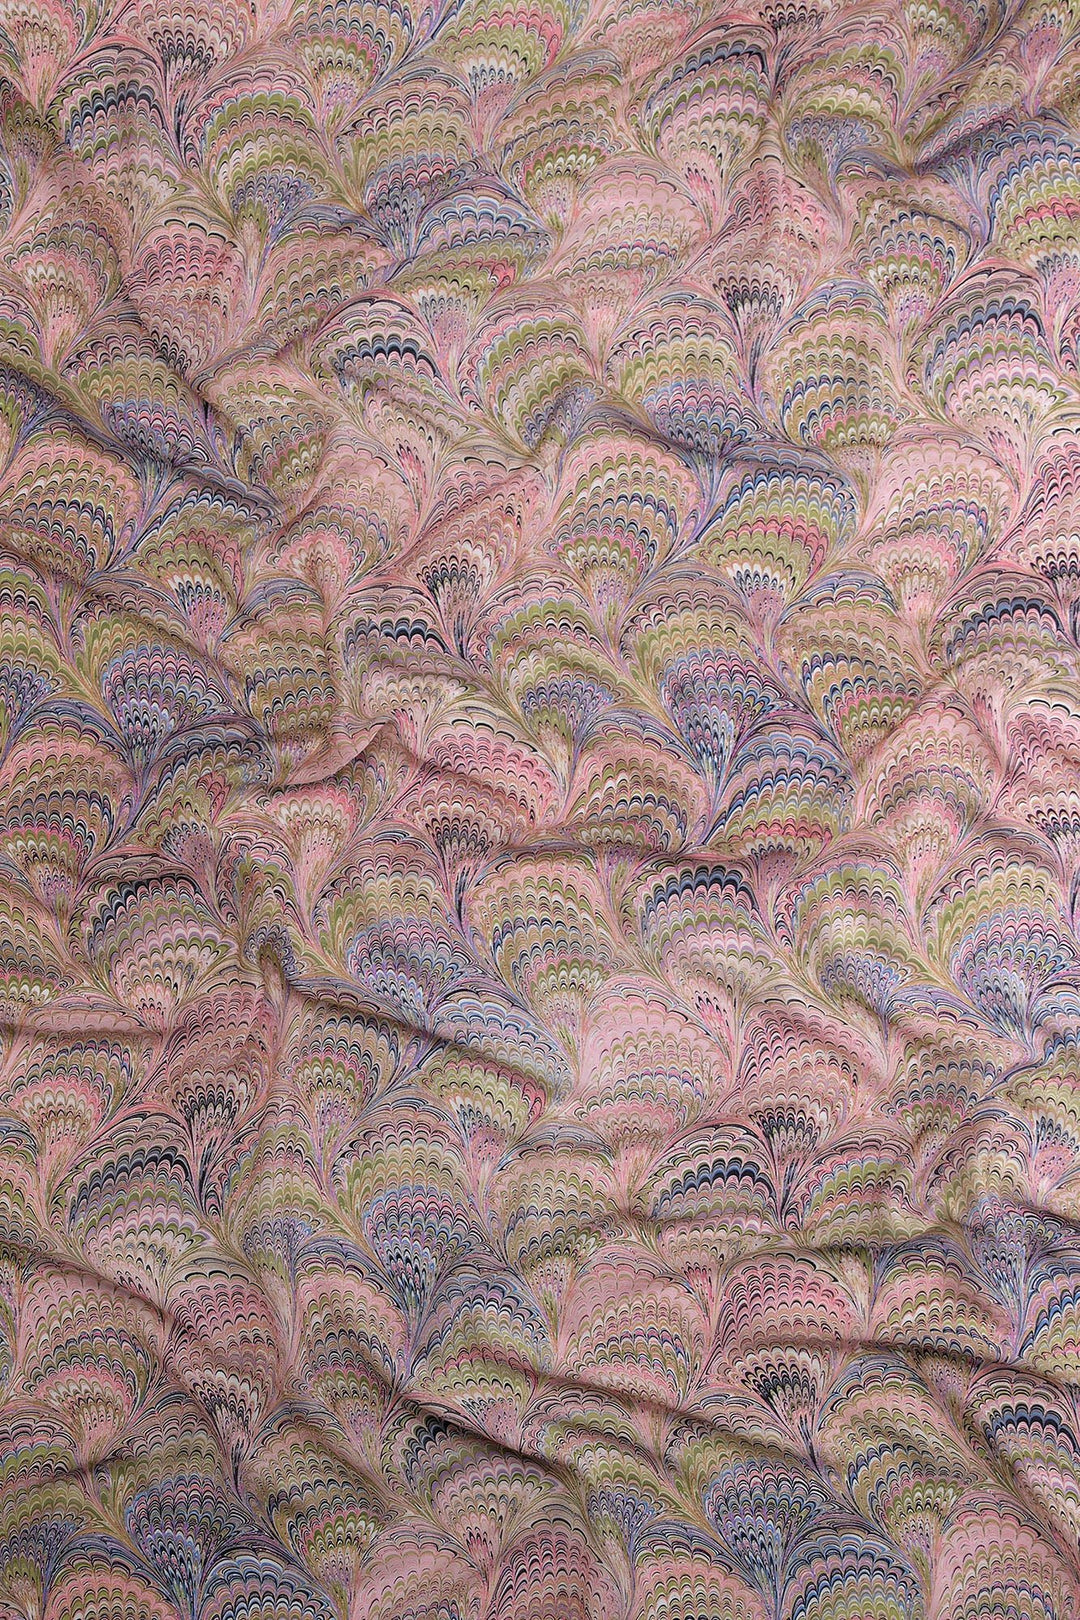 Marbled Pink Scarf - One Hundred Stars